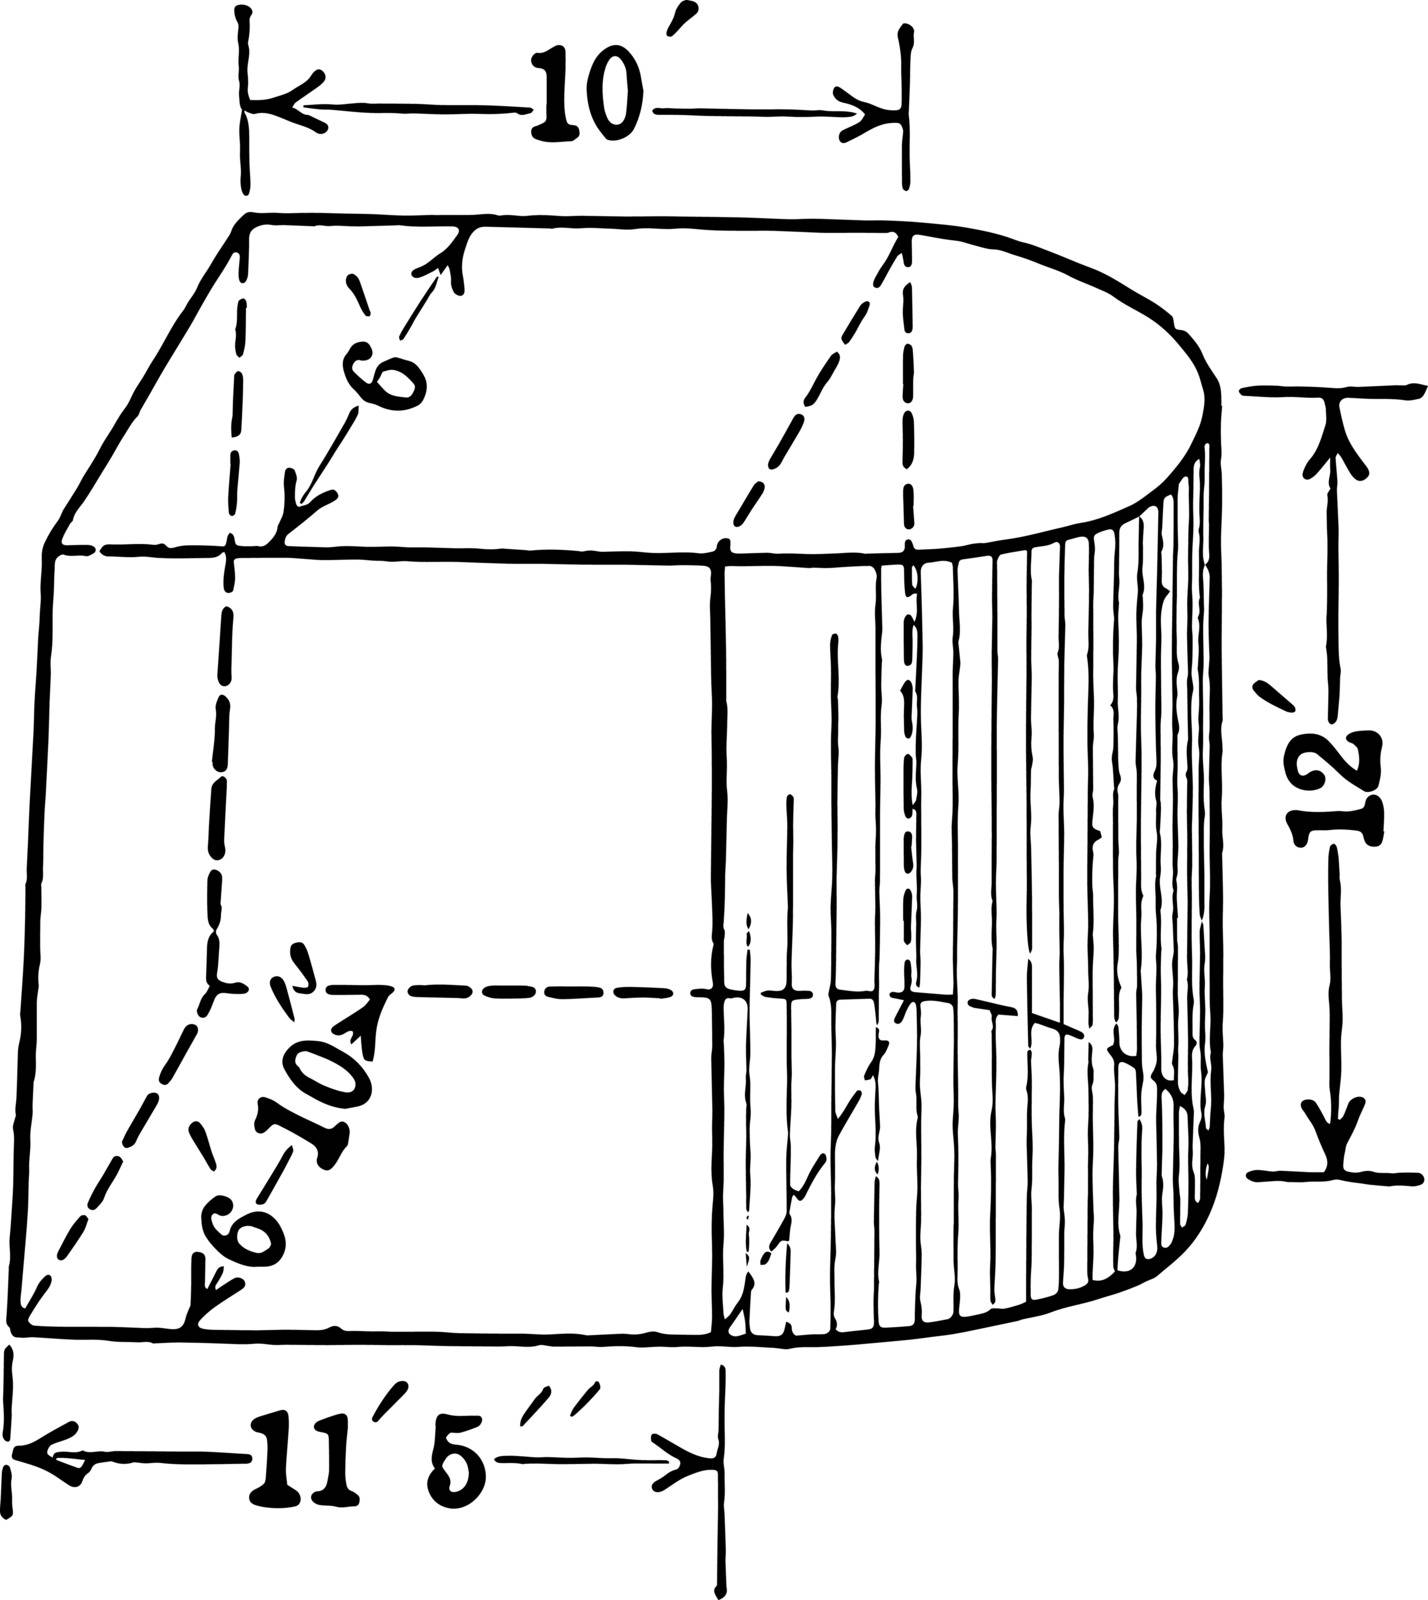 A diagram of a composite figure formed by a truncated trunk and half a cylinder. The edges of Frustum go from 6 feet to 11 feet to 5 inches and the cylinder has a height of 12 feet, vintage line drawing or engraving illustration.